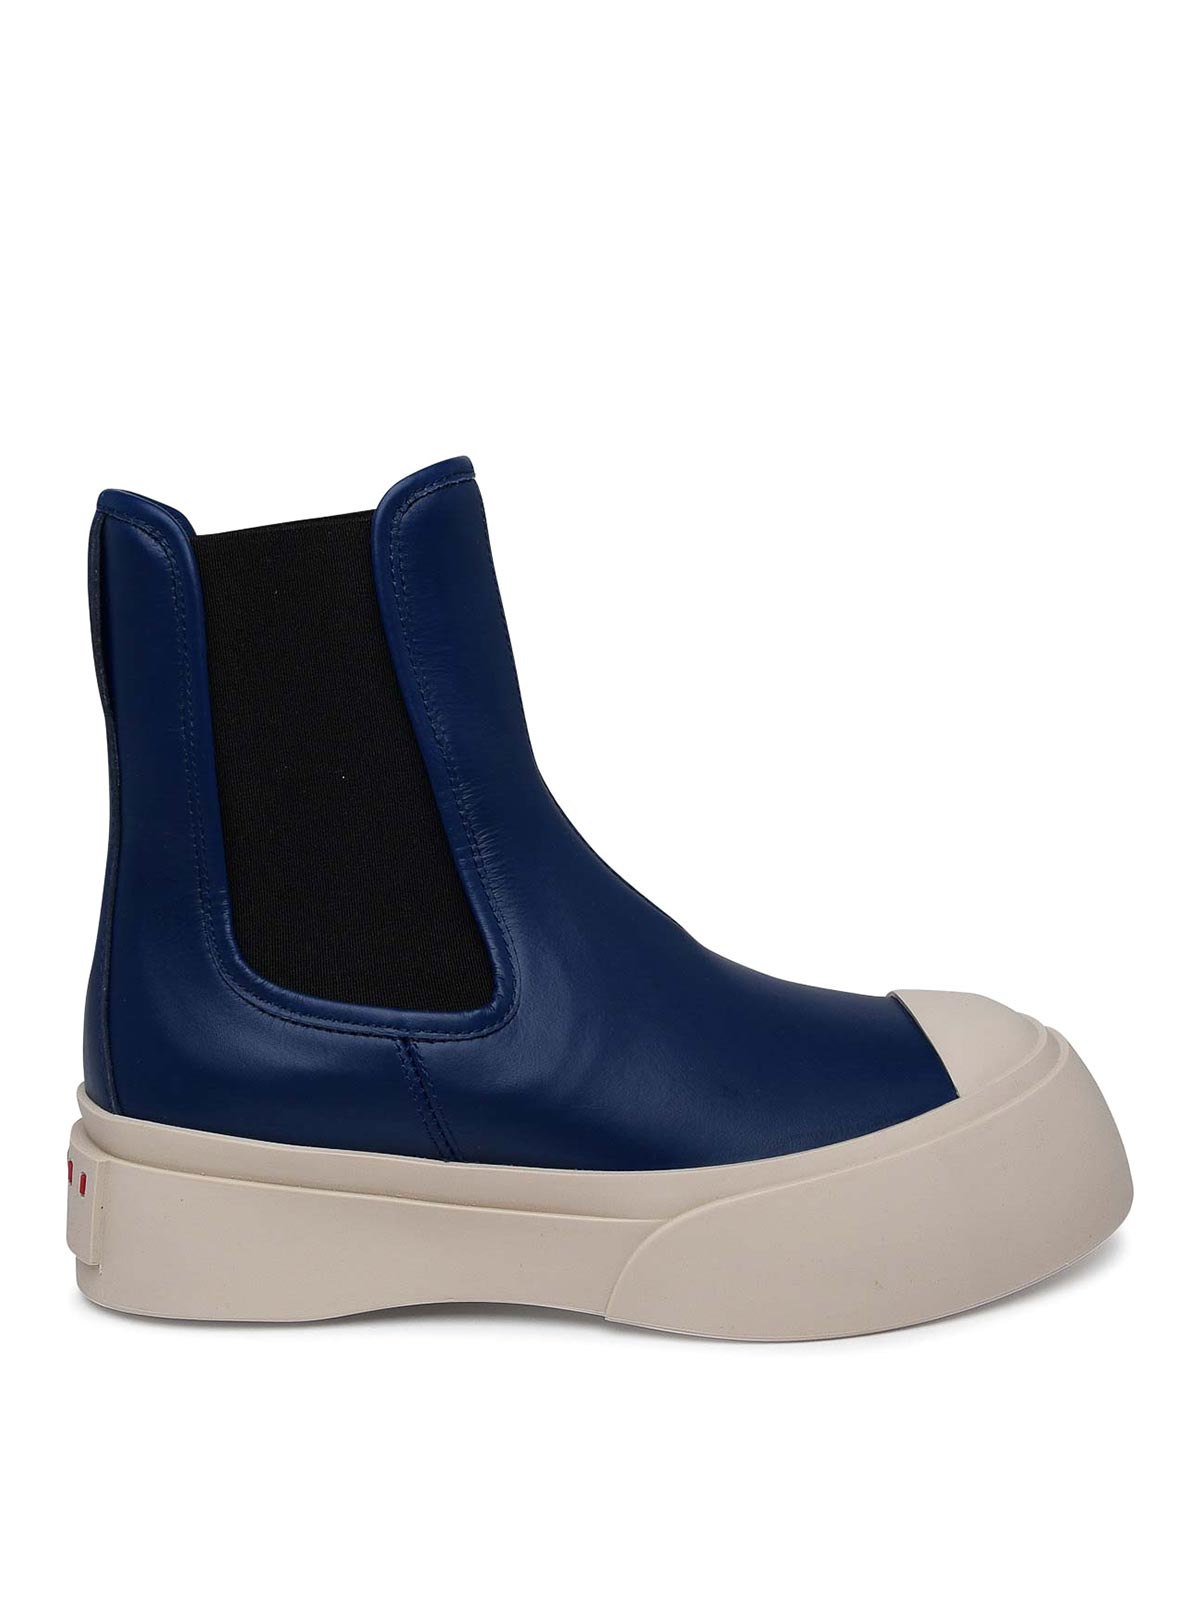 Boots Marni - Boots - TCZW000502P272200B81 | Shop online at THEBS [iKRIX]